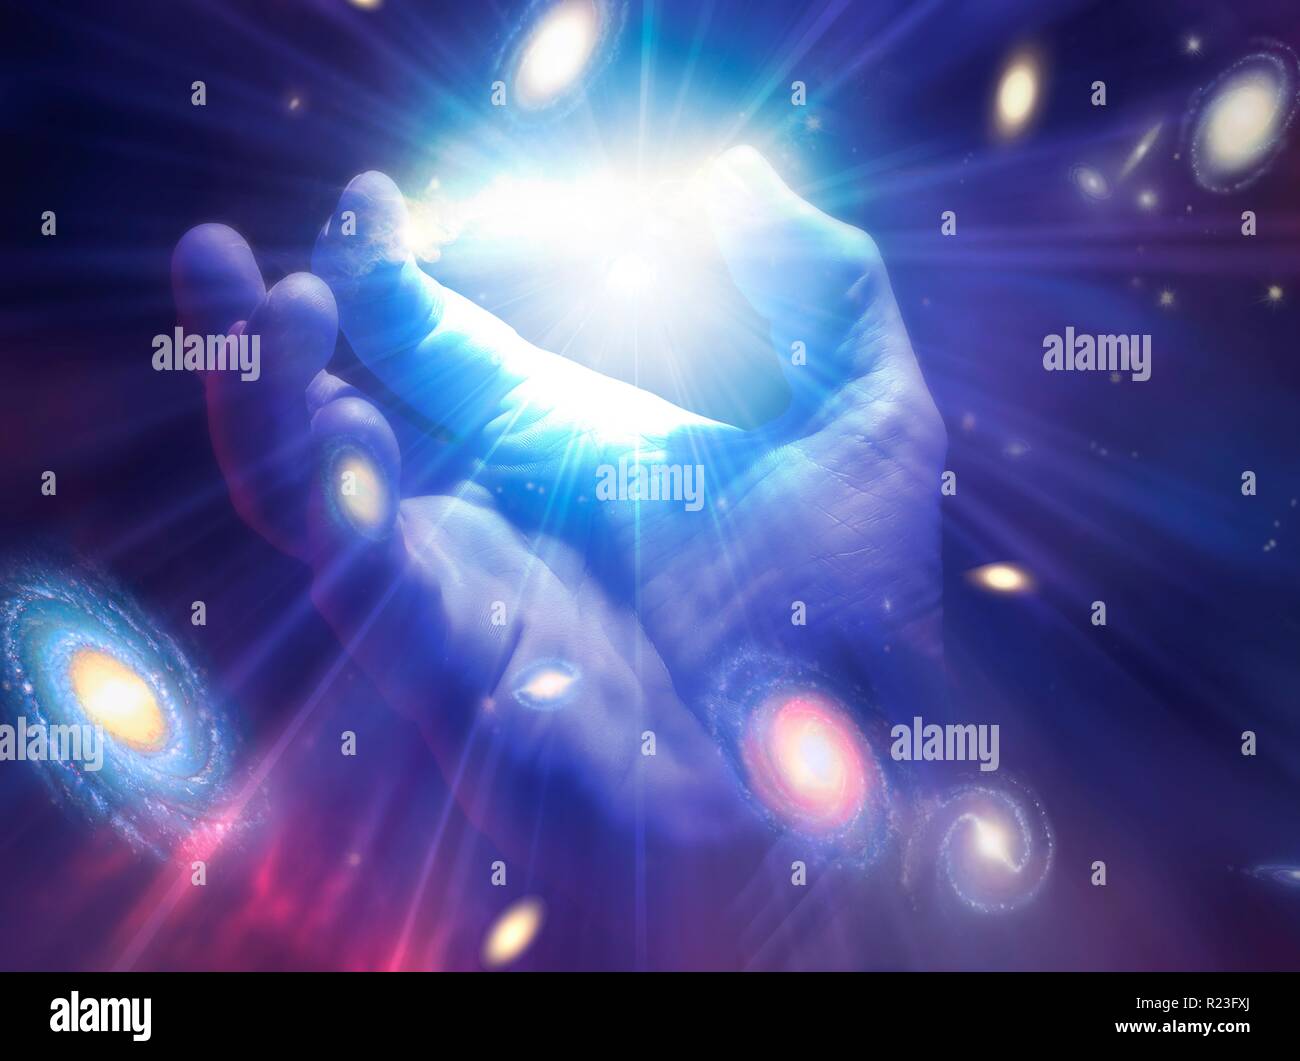 Conceptual illustration of creation. A hand is shown with light rays and galaxies emanating from it. Stock Photo